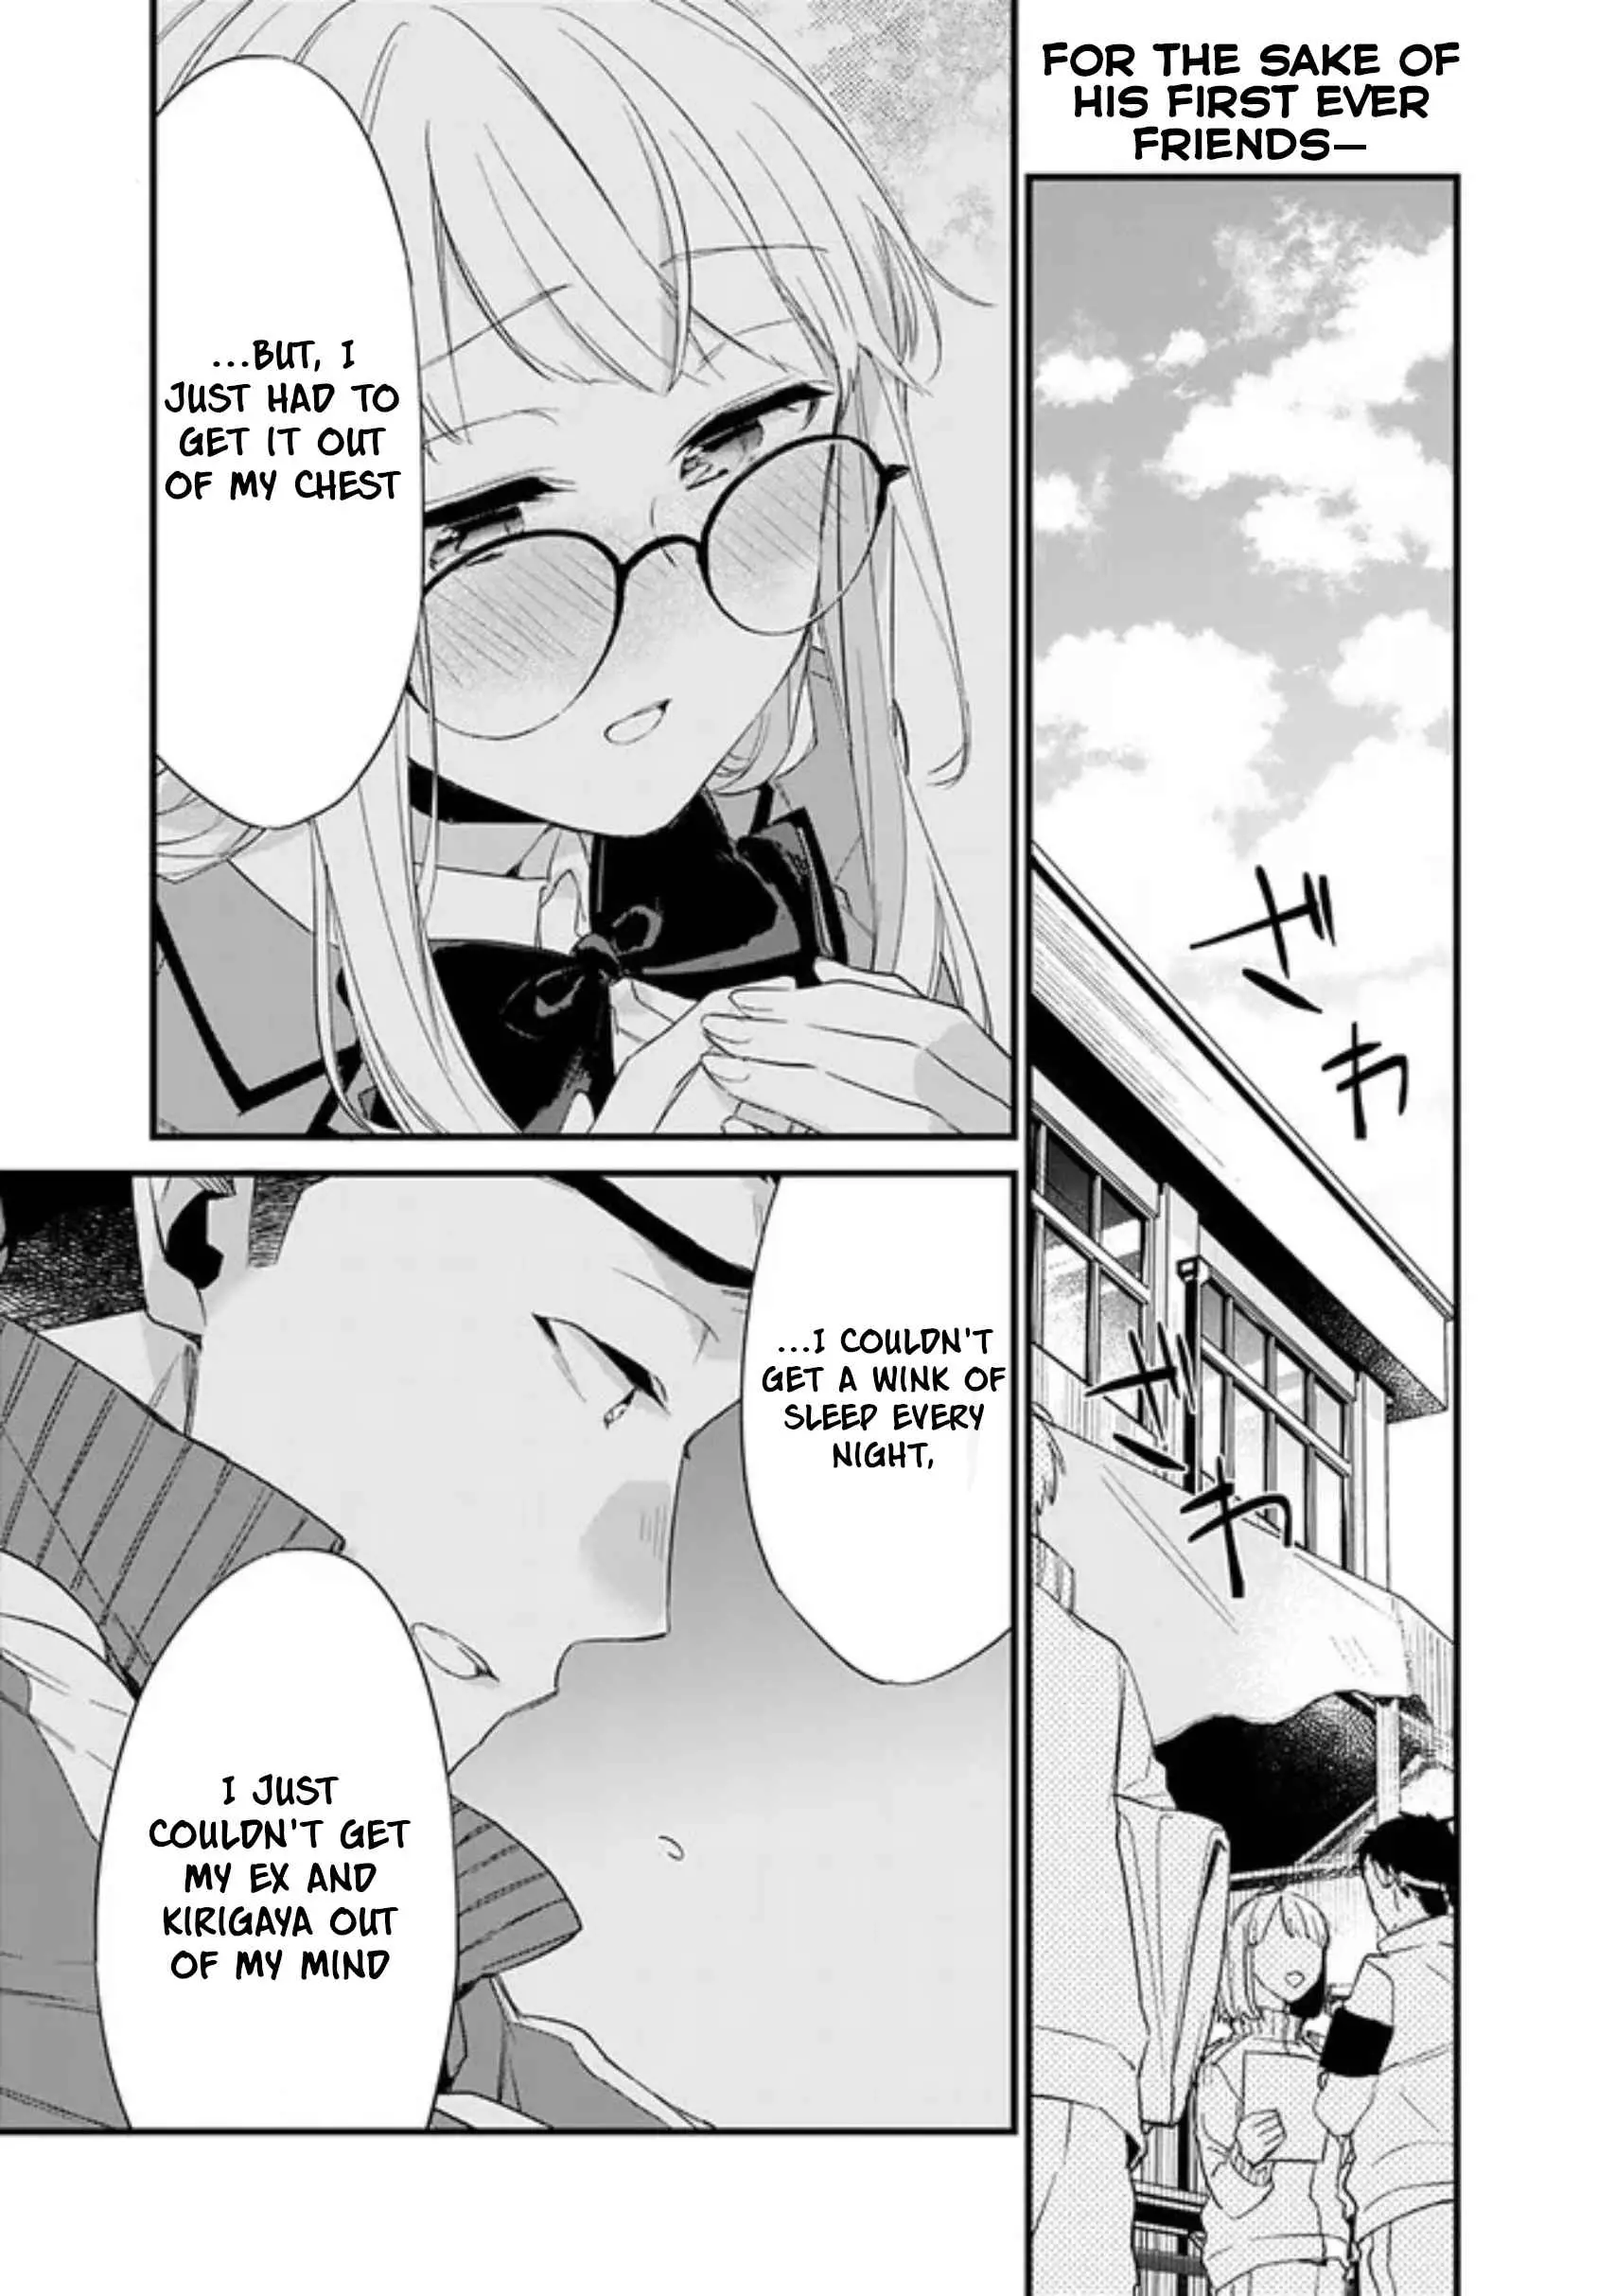 I’M Sick And Tired Of My Childhood Friend’S, Now Girlfriend’S, Constant Abuse So I Broke Up With Her - 6 page 2-ff0af9e0